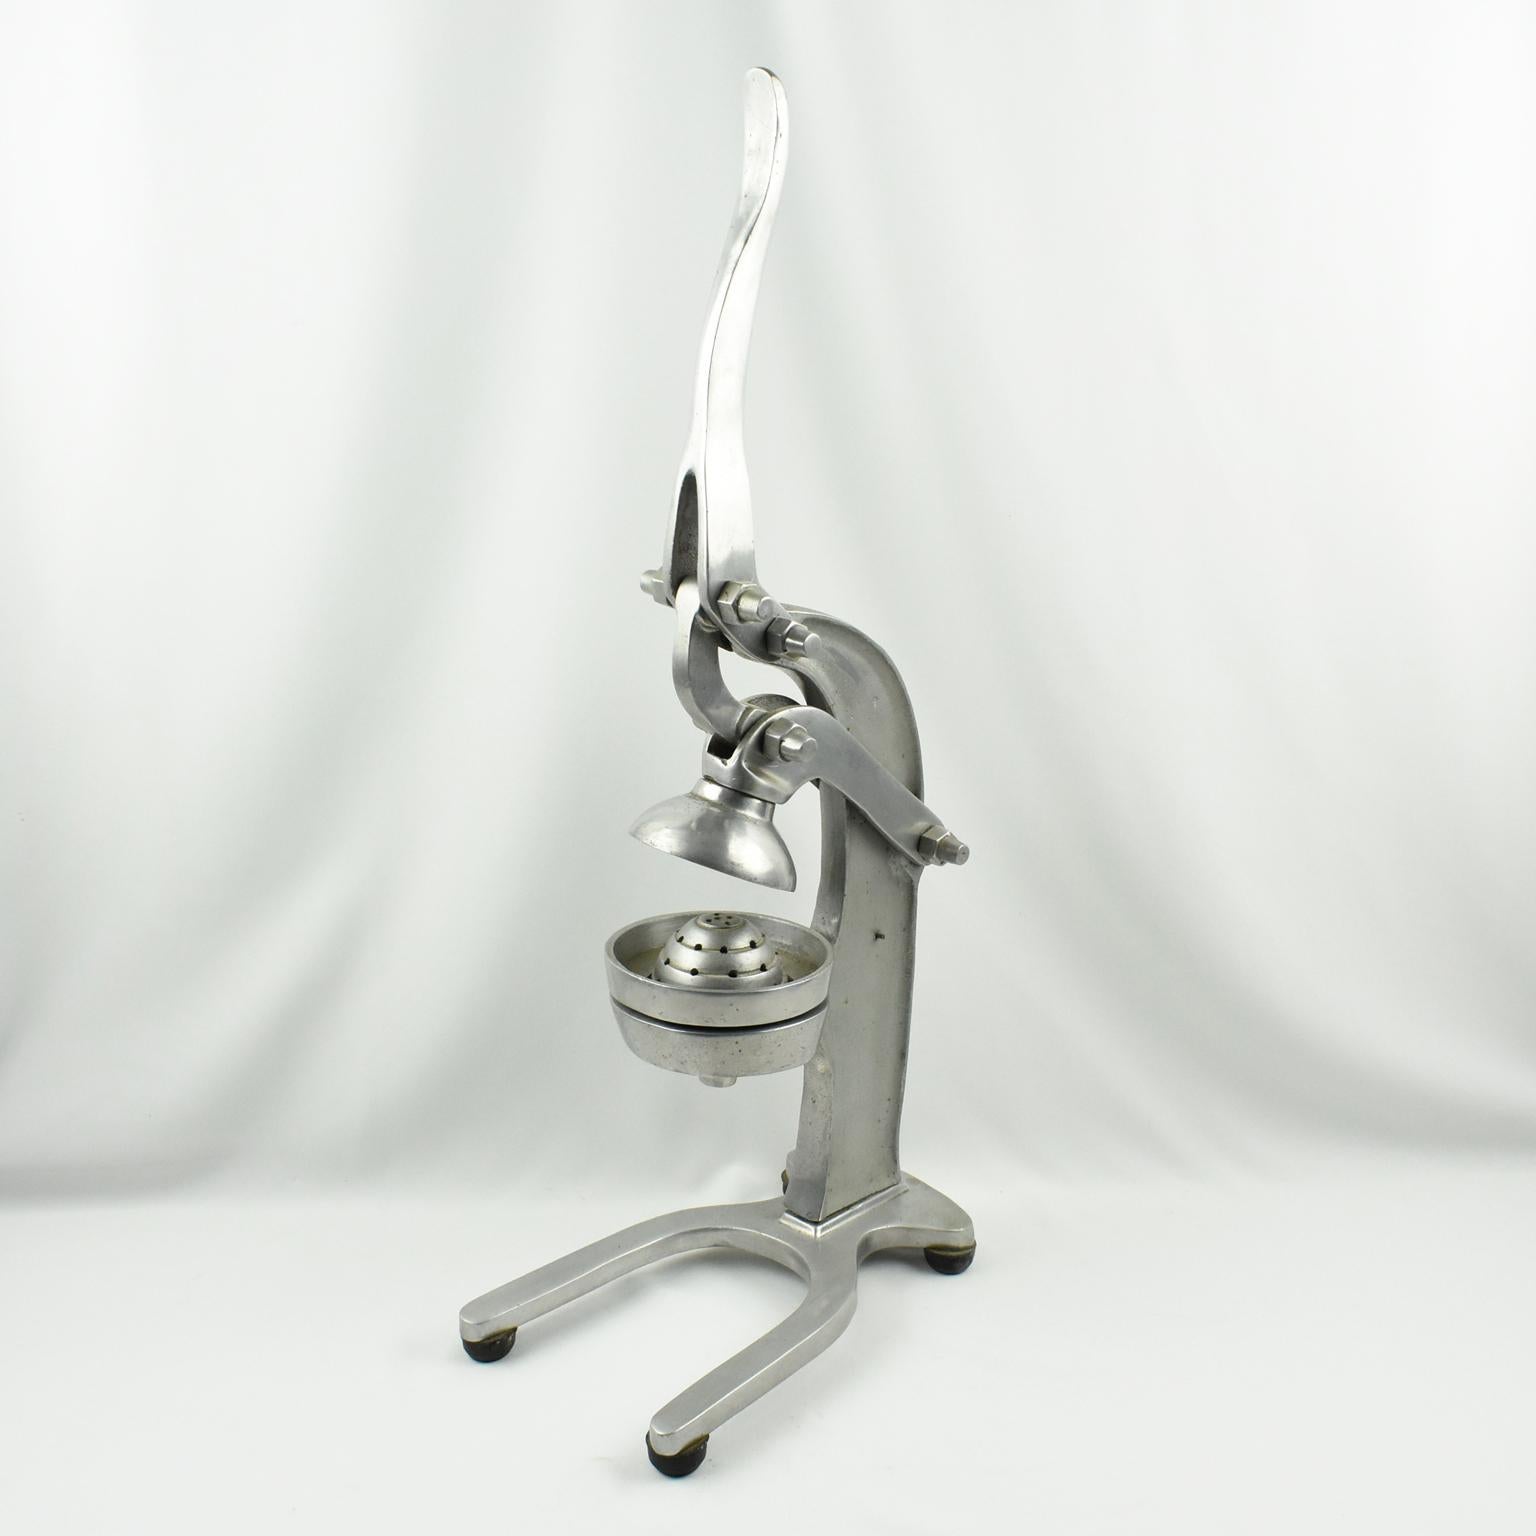 Great looking 1940s lemon squeezer or juicer. Heavy duty mechanical barware tool, that almost looks like a torture machine !
Industrial tabletop citrus press was used in cafes and restaurants in France, made of cast aluminum, the entire piece is